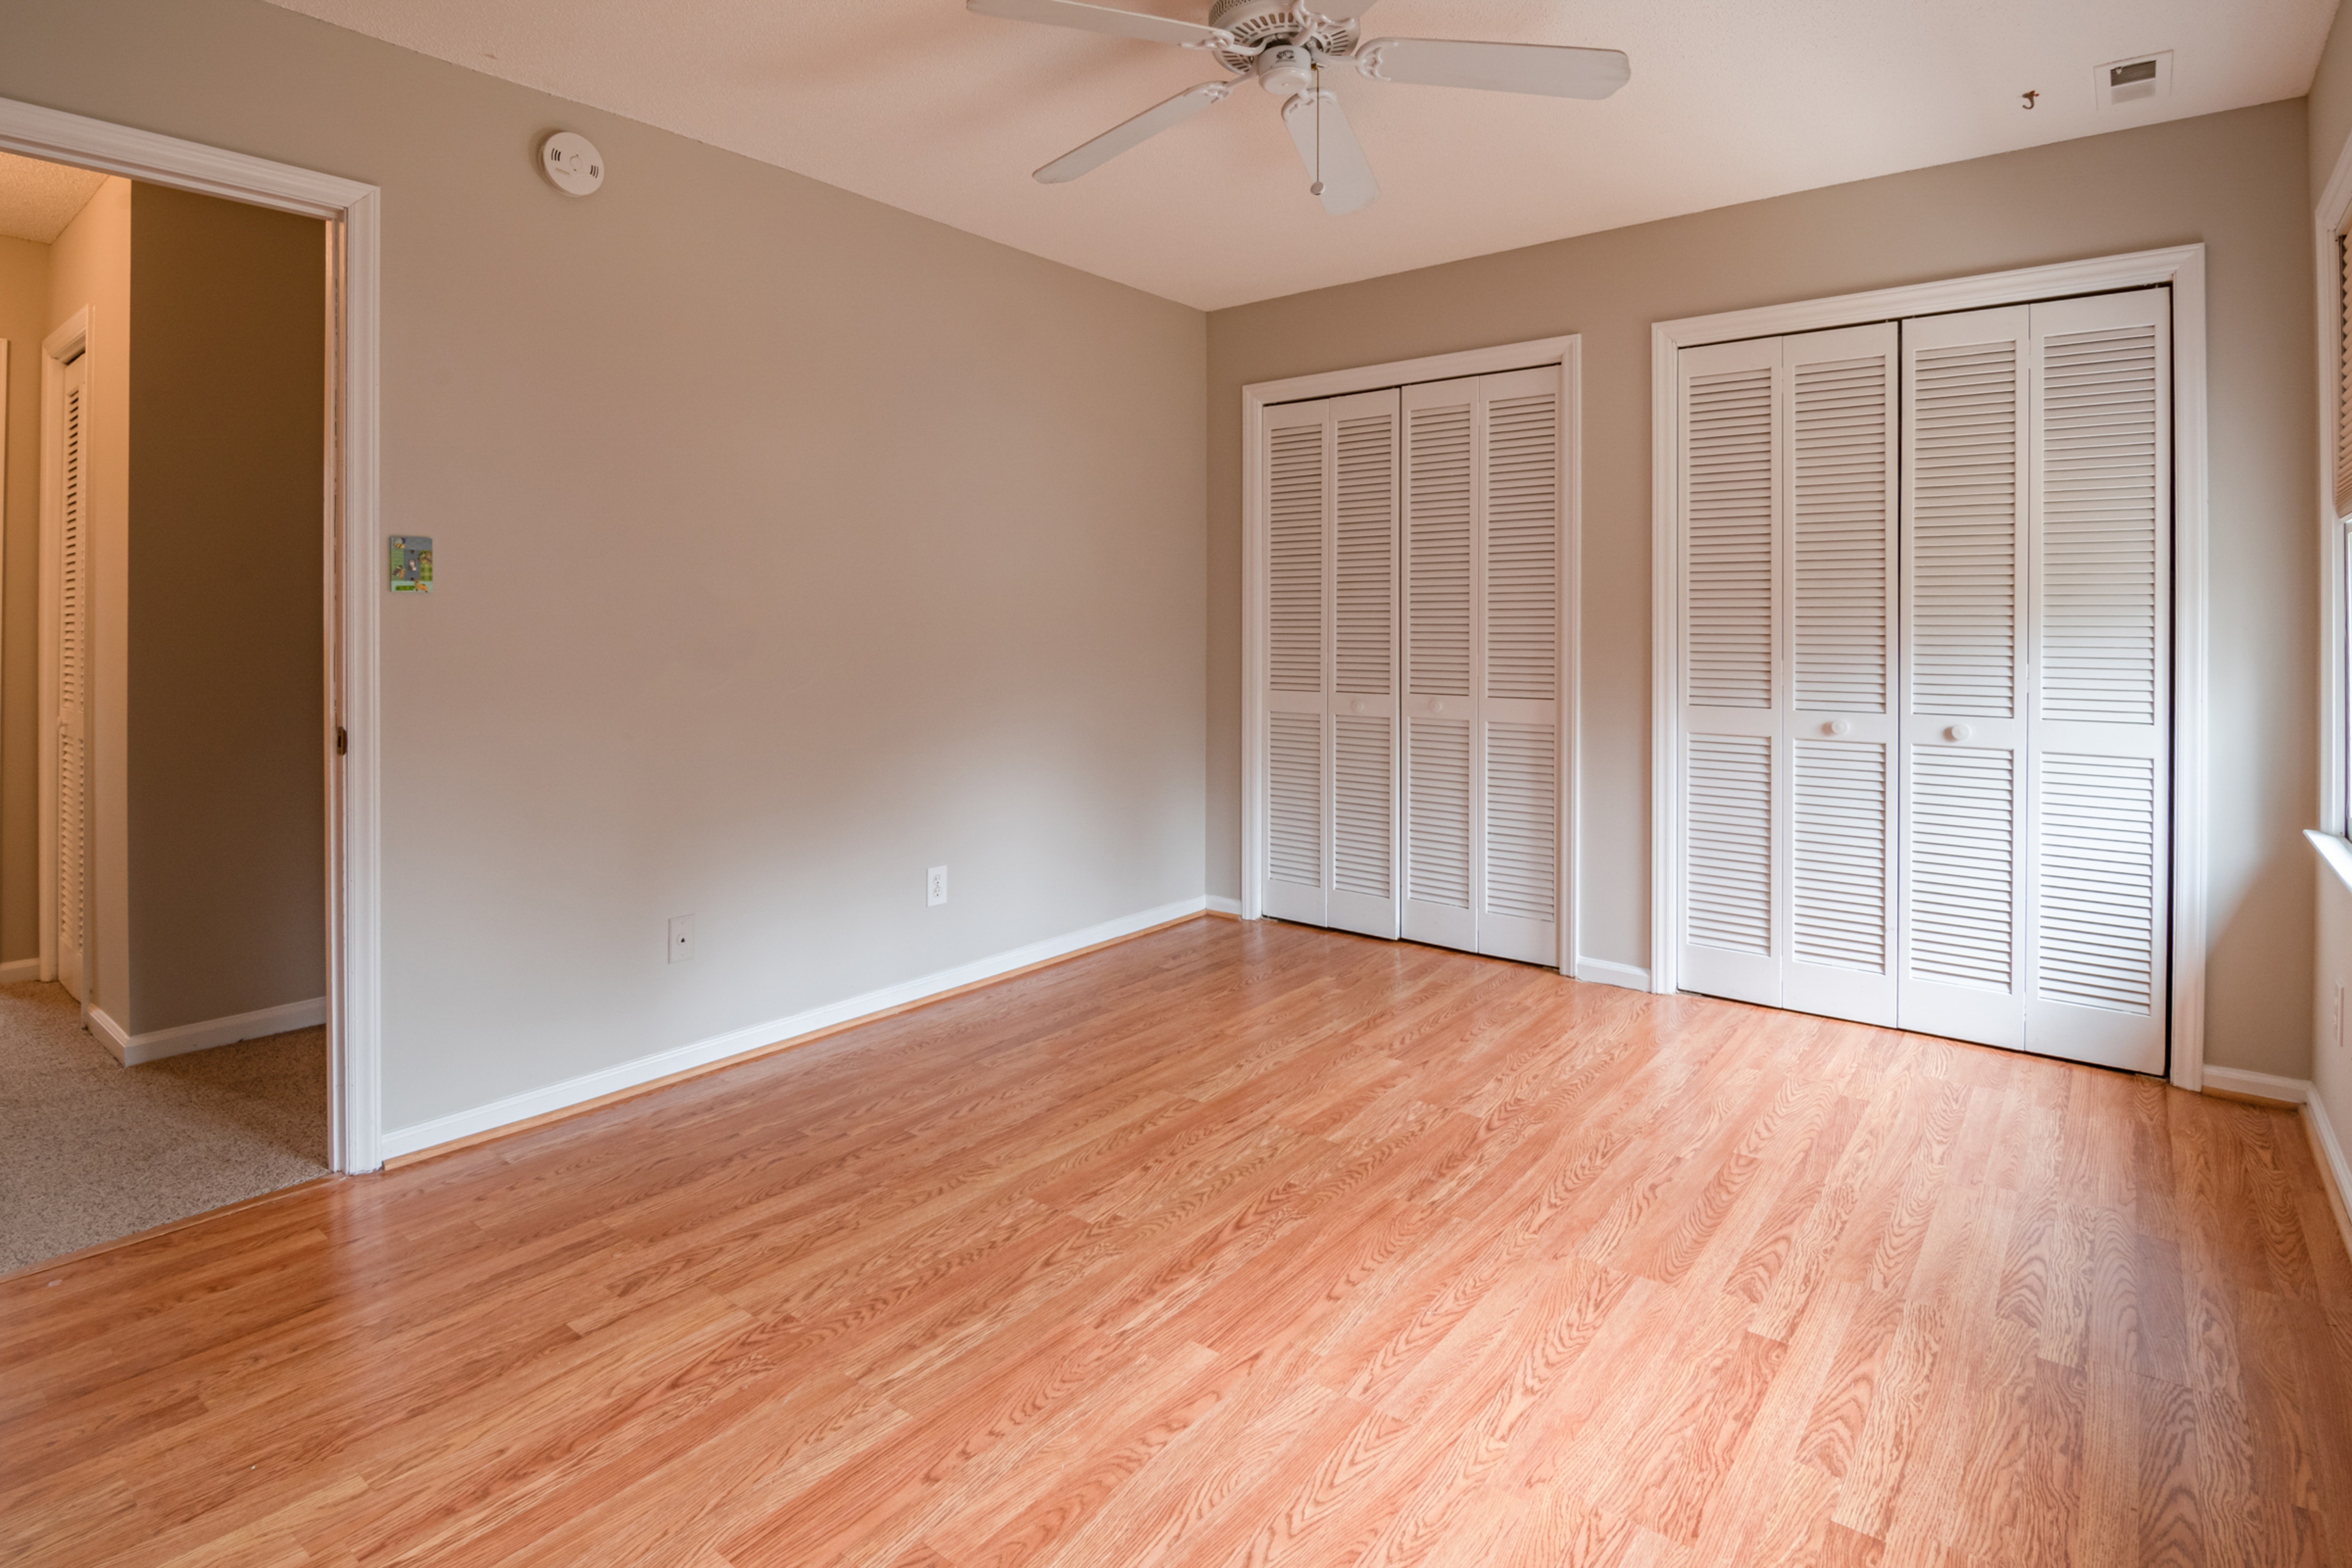 Wow!!! This project we did out in Tempe was a fun one! We installed about 1900 feet of this Hardwood and love how it looks in this house. In this project we removed carpet and replaced it with Hardwood. Call Home Solutionz Today For Your Flooring Project <(623) 289-3880>. Home Solutionz - Tempe is Licensed, Bonded, and Insured. Home Solutionz offers 12 - 24 Months 0% Financing Through Wells Fargo. Home Solutionz Tempe - 3125 S 52nd St, Suite 107 Tempe, AZ 85282 United States  Hardwood  FloorInstallation  Flooring